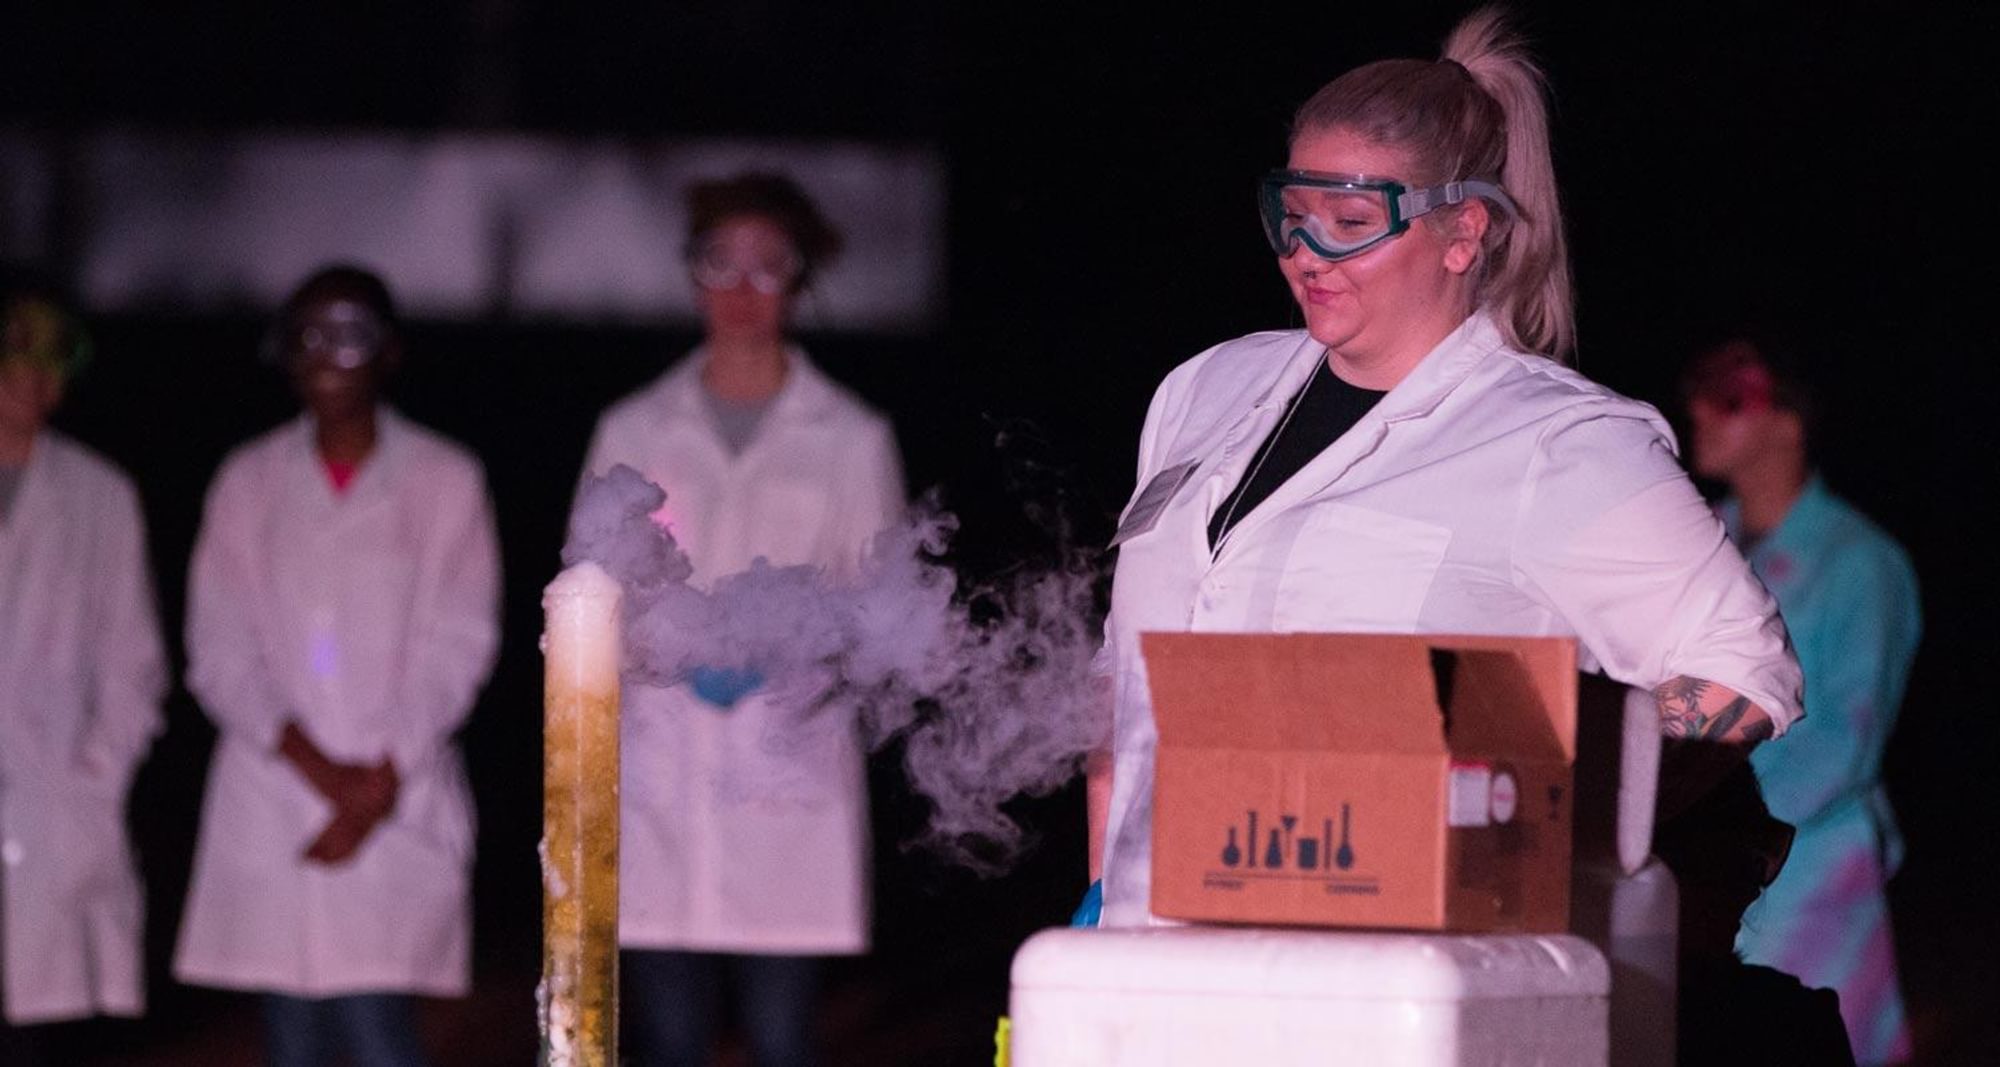 Demos in the Dark event featuring chemical demonstrations set to exciting music